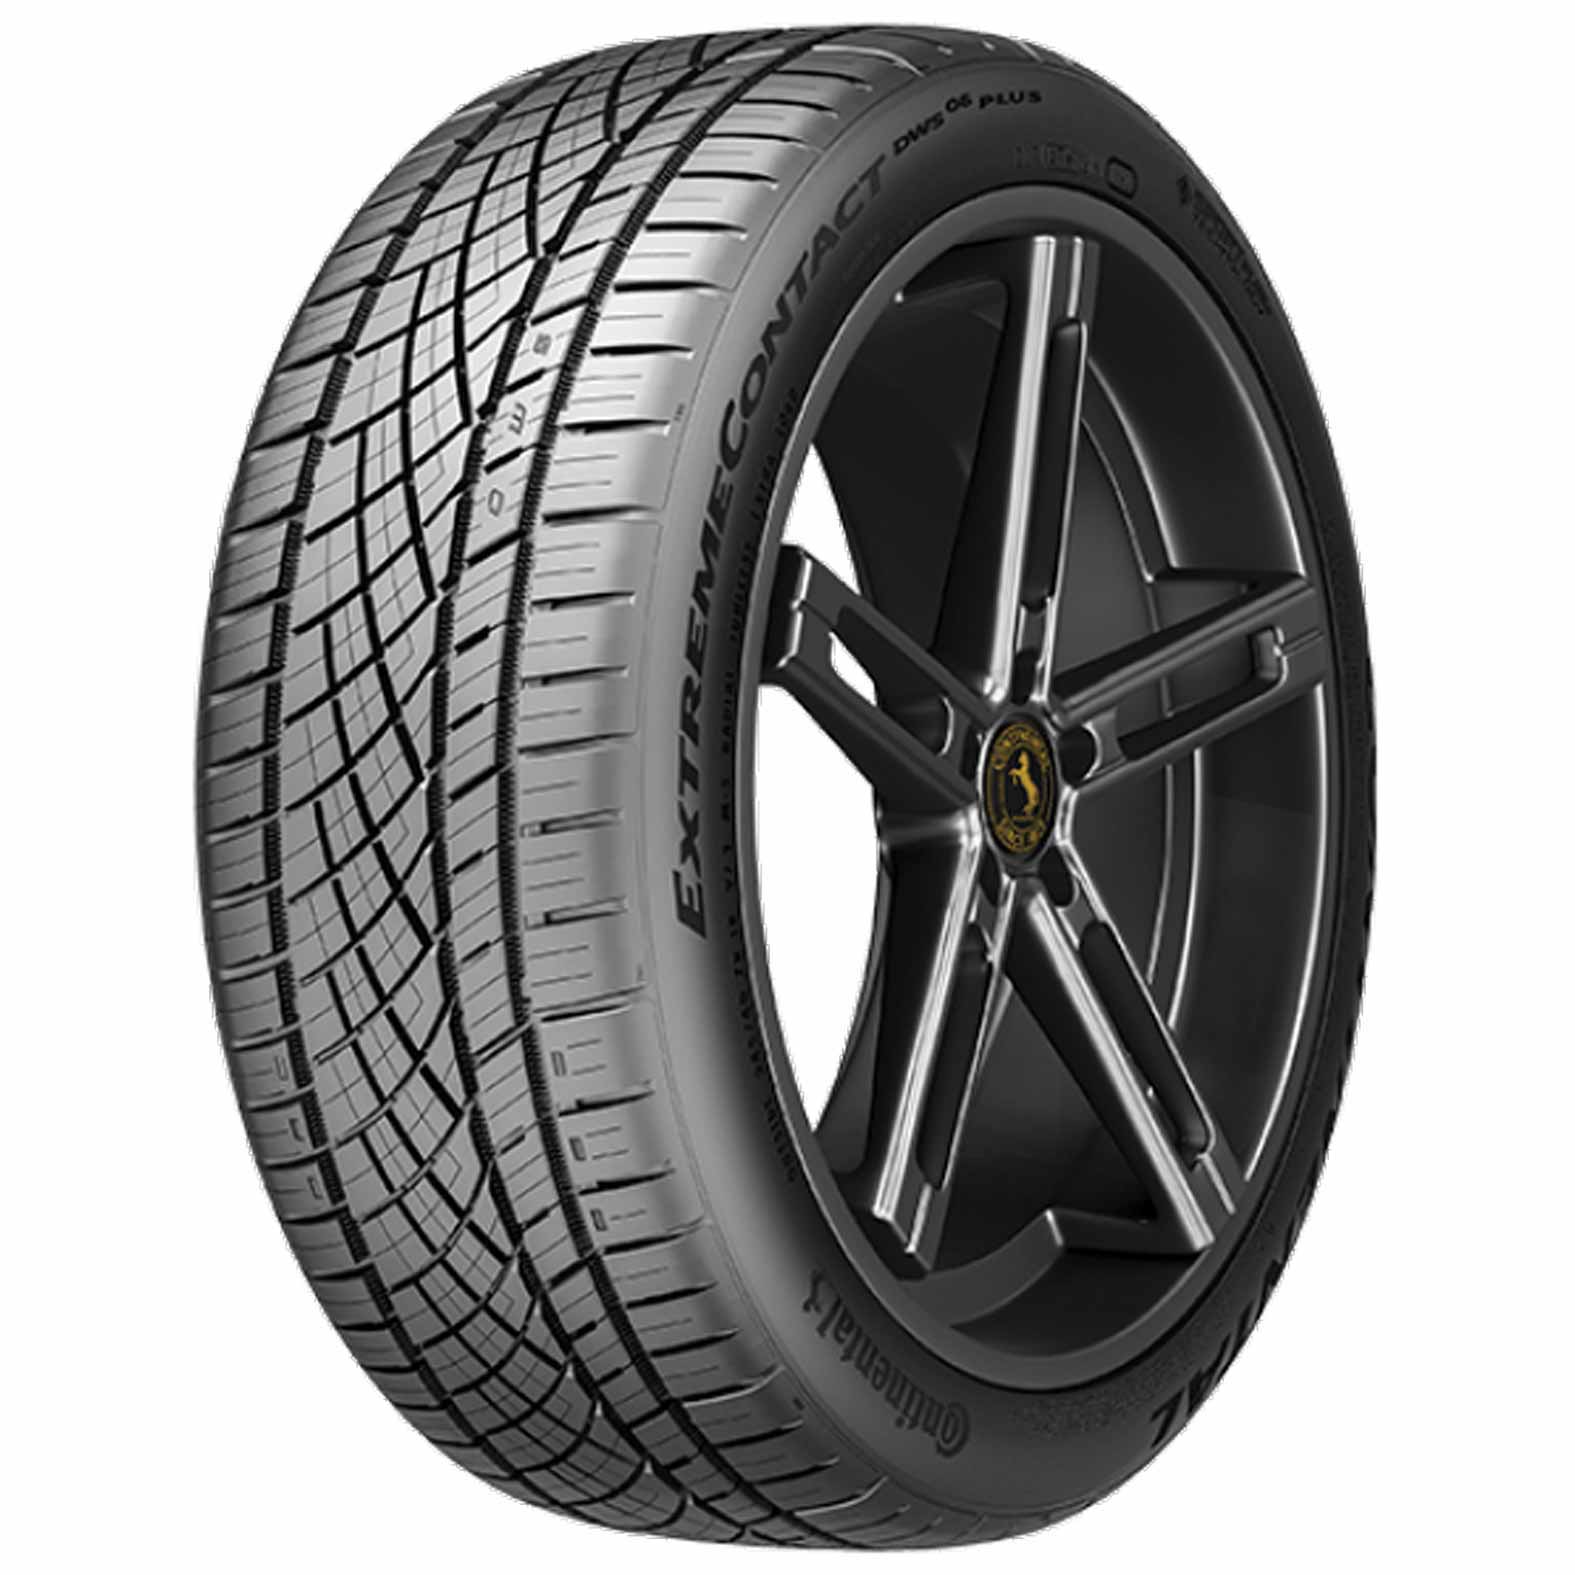 Continental ExtremeContact DWS 06 + Tires for Performance | Kal Tire